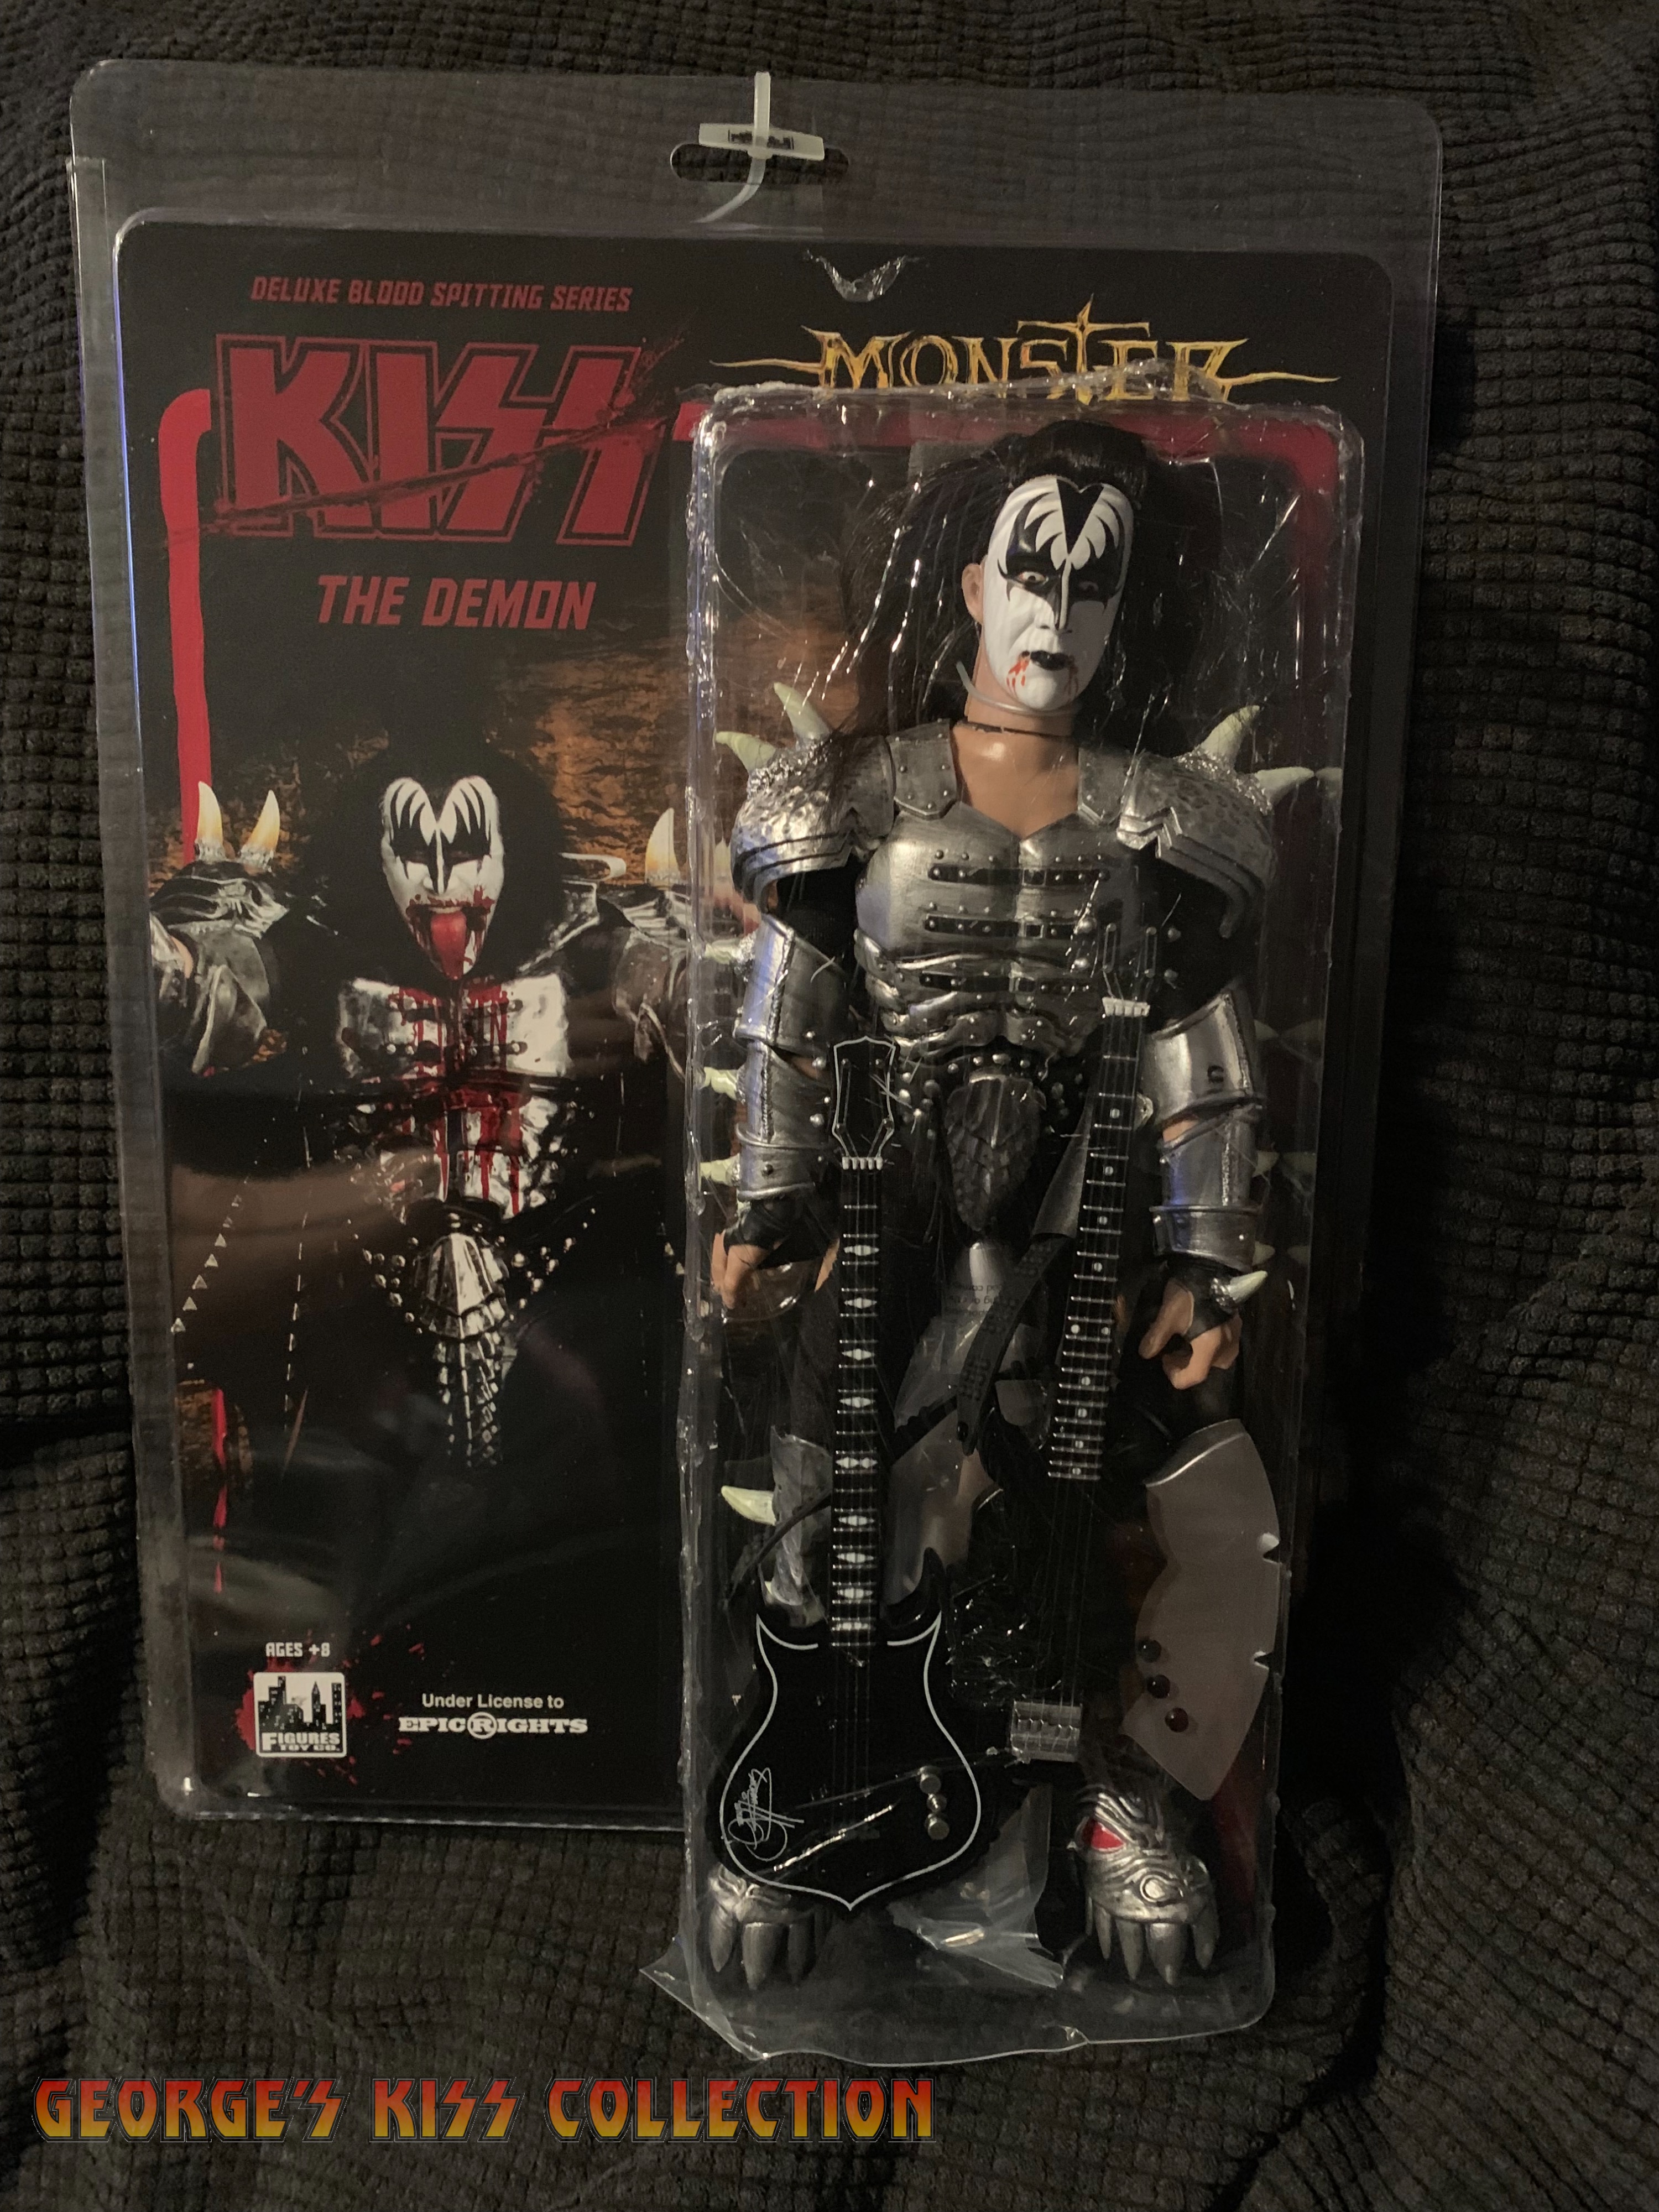 kiss 12 inch action figures